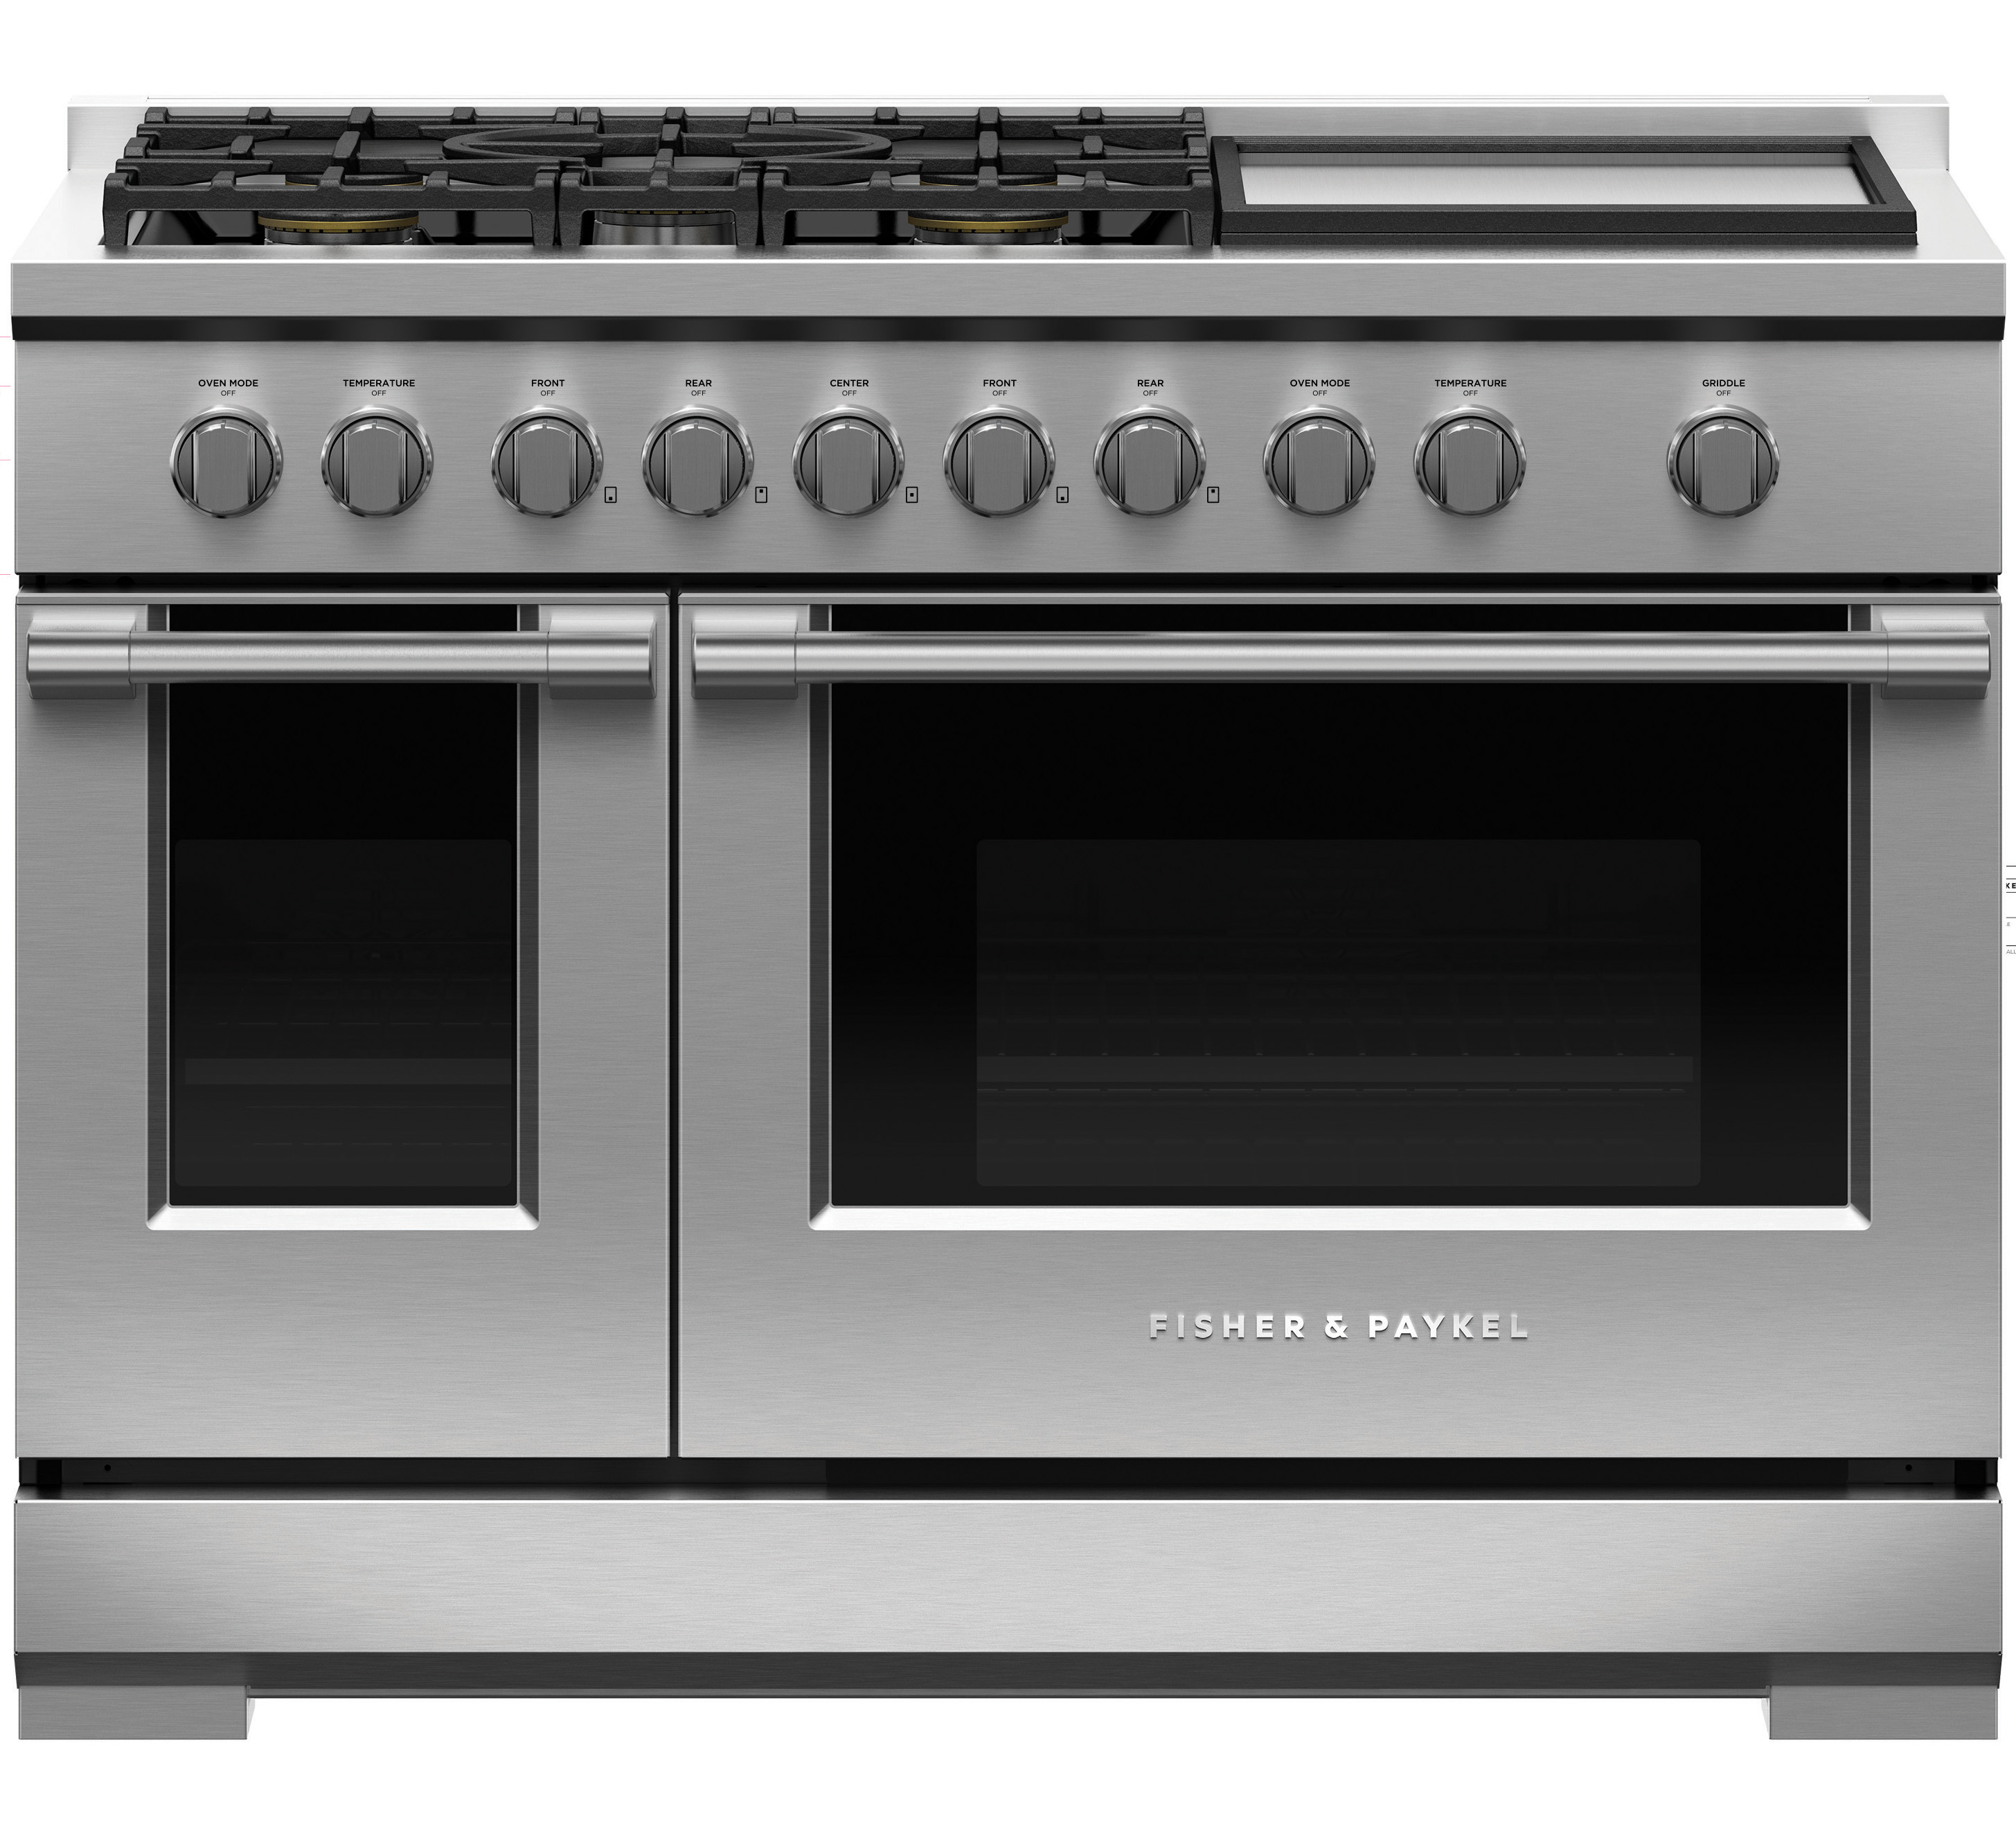  Fisher&Paykel RGV3-485GD-N